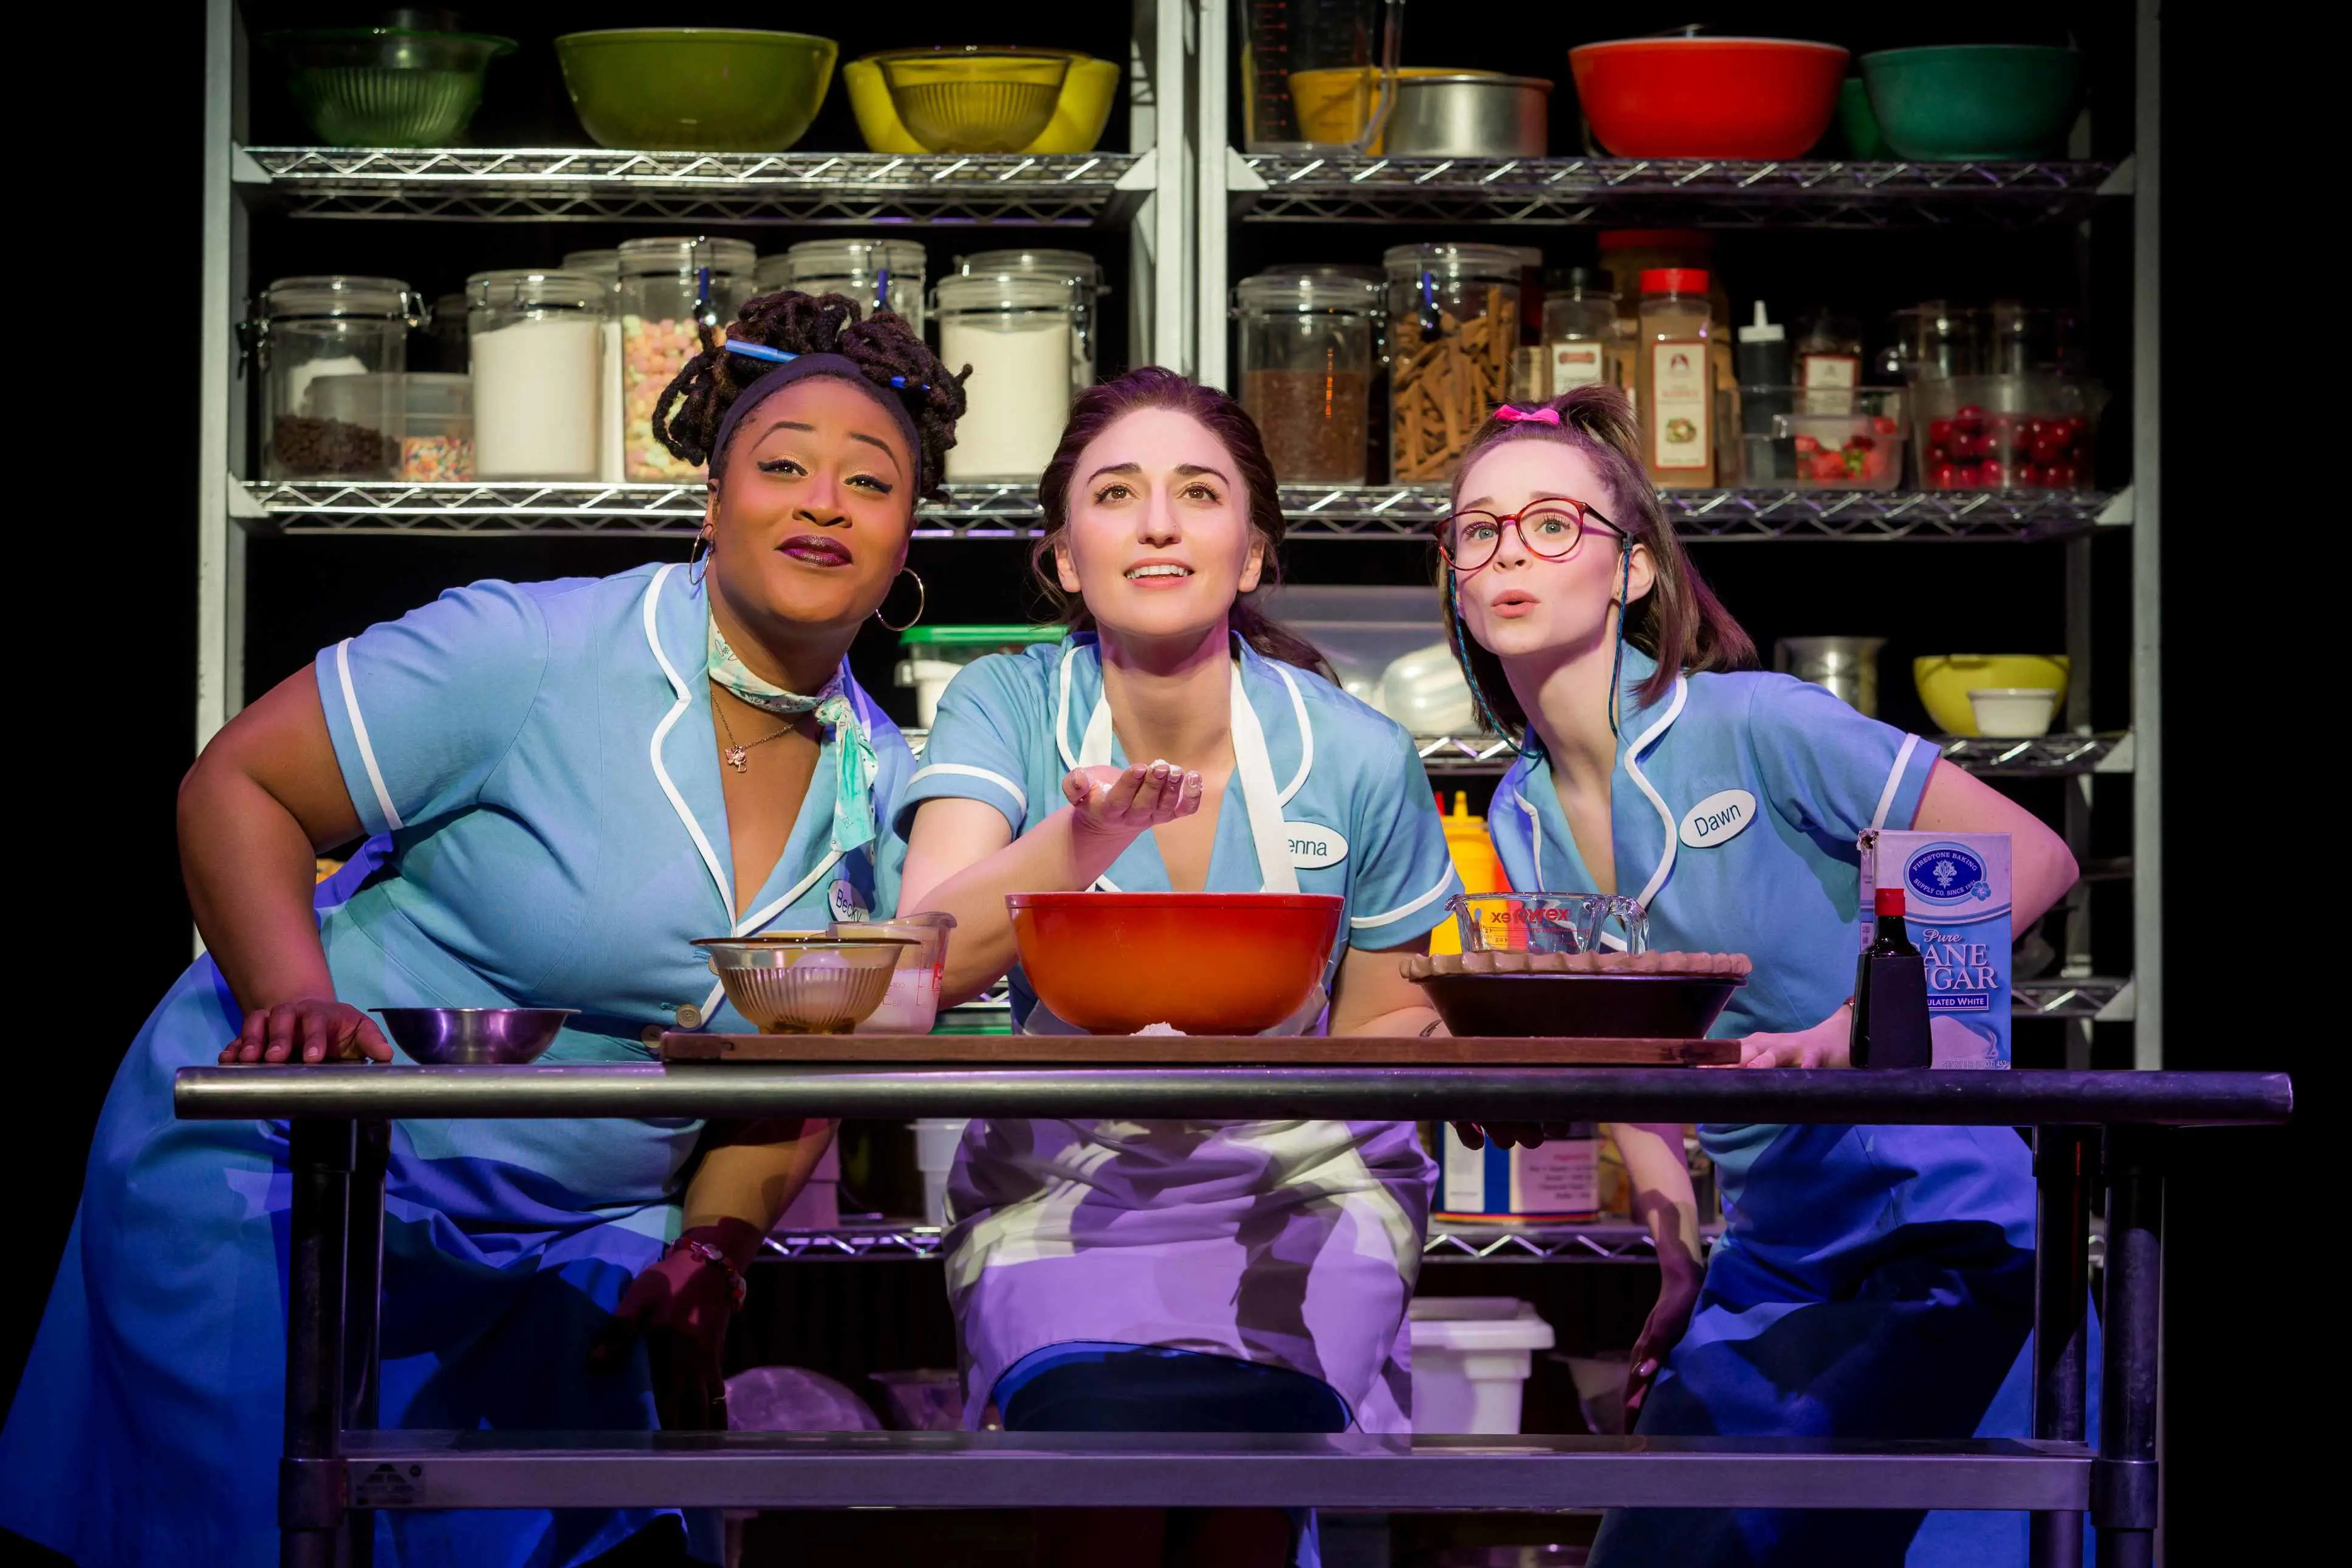 A Scene From Waitress, The Musical Which Will Be Screened In The Event